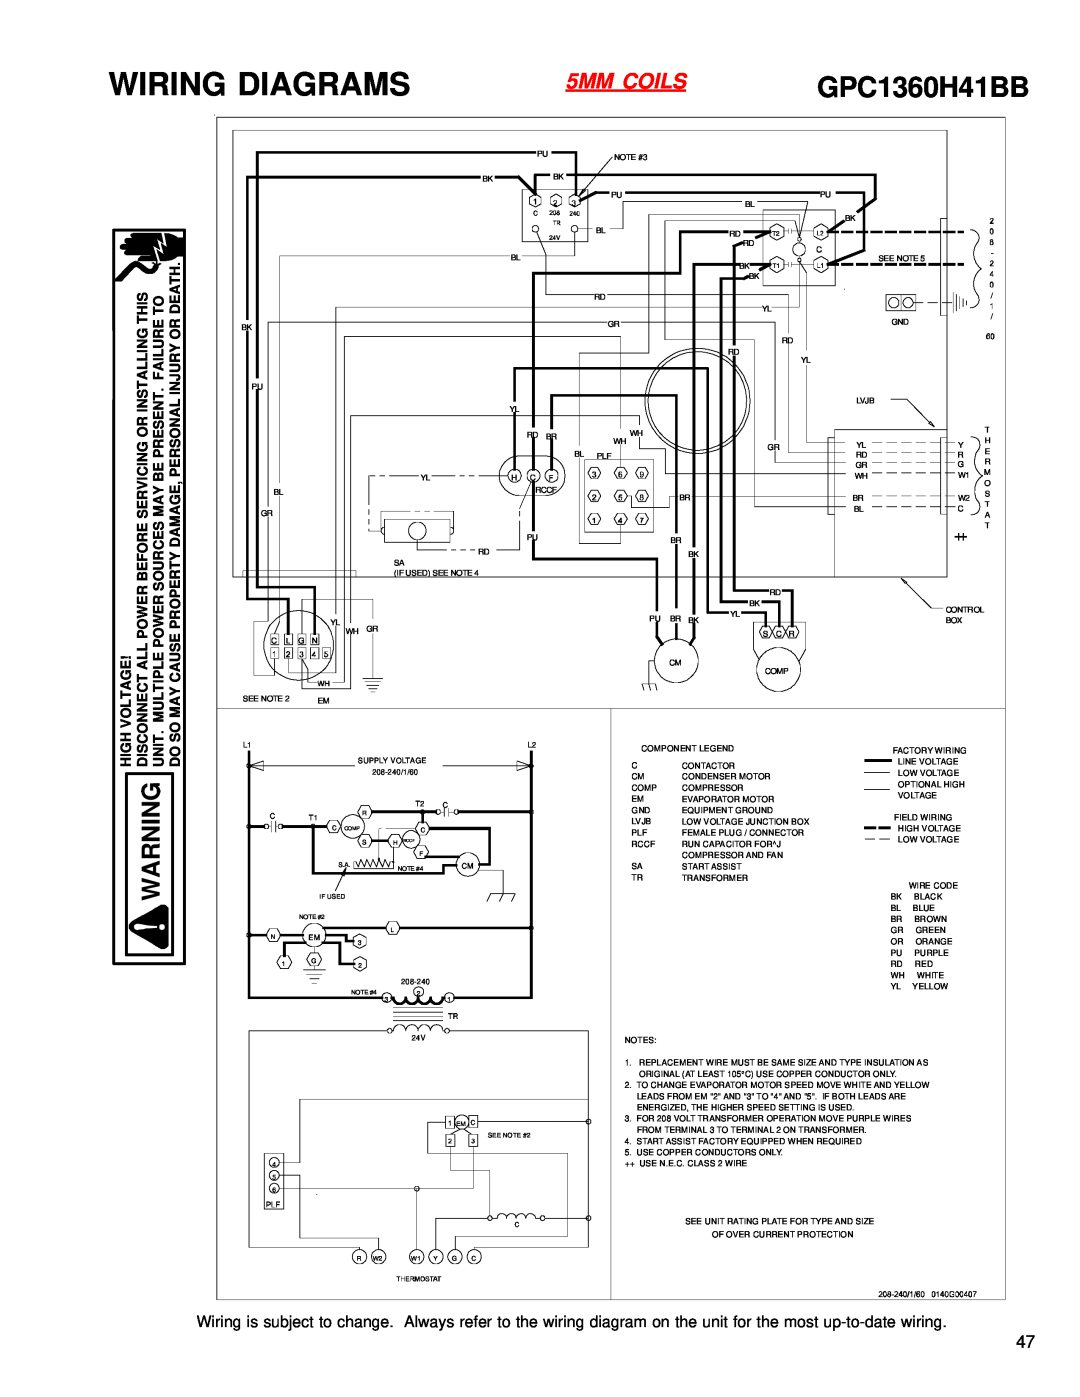 Goodmans GPC1324H41A, GPC 13 SEER R-410A service manual Wiring Diagrams, GPC1360H41BB, 5MM COILS, High Warning Unit. Do 